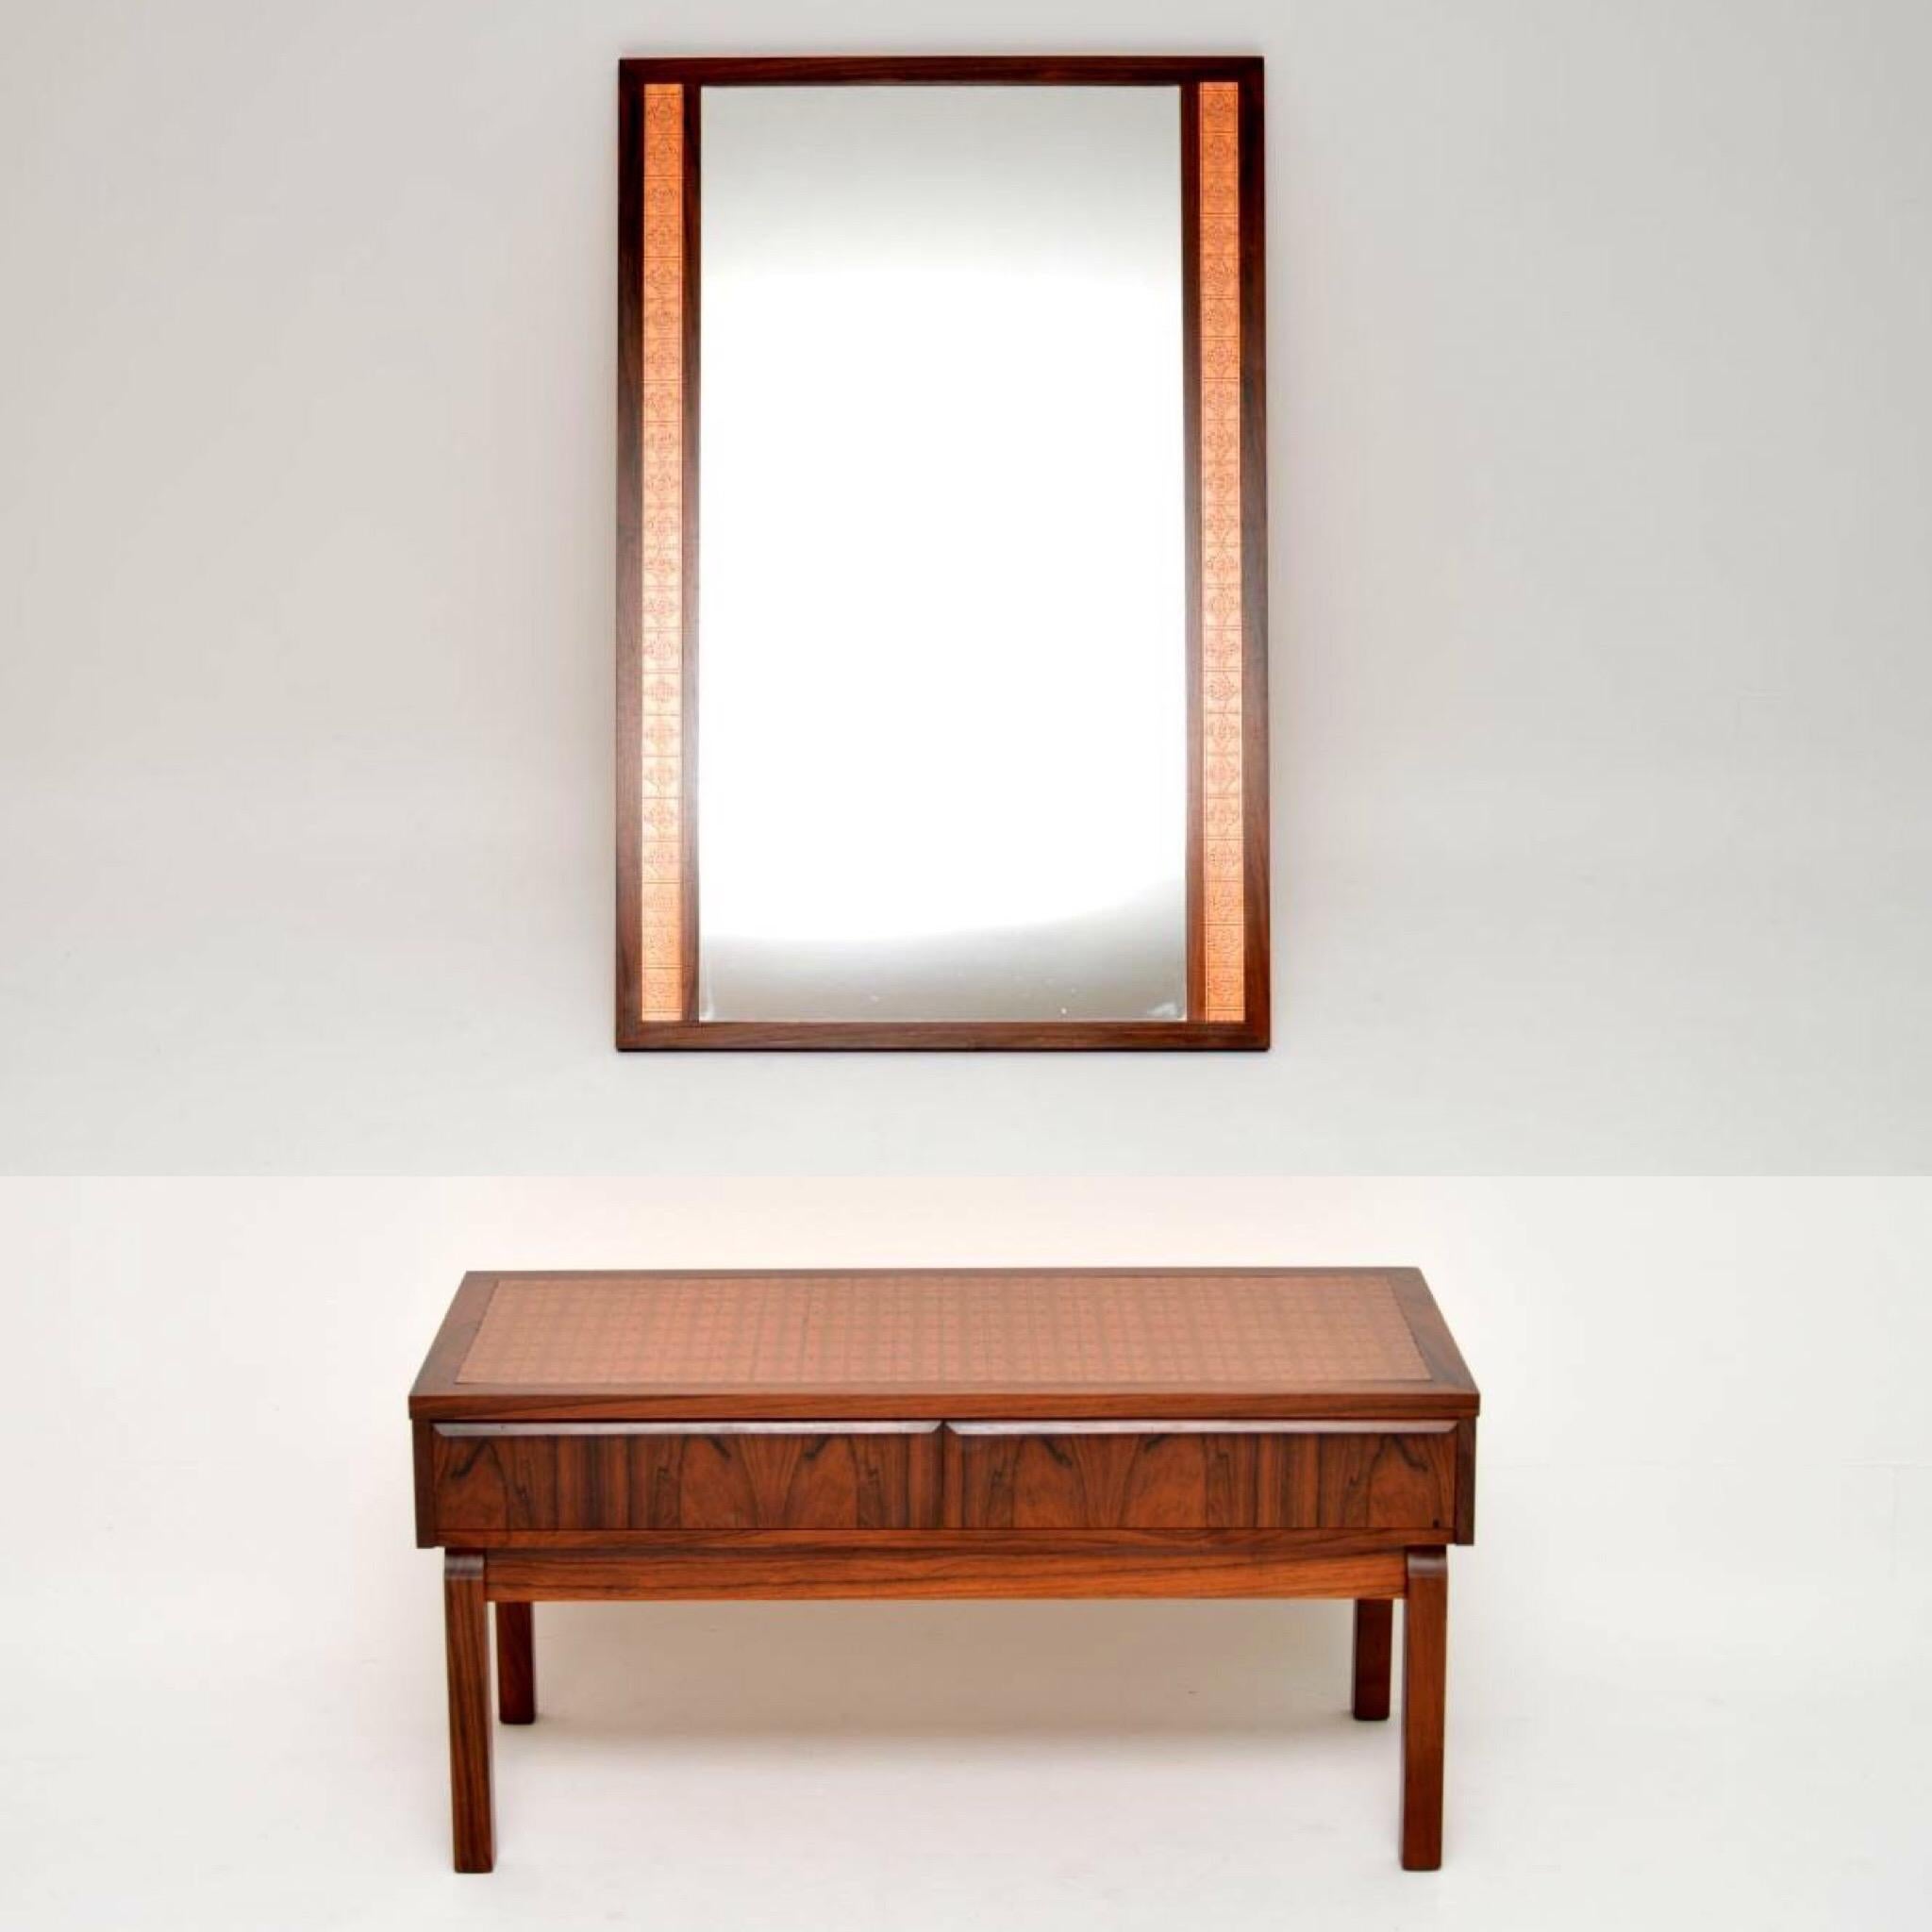 A stunning and very rare matching set, this consists of a side table and a mirror, both inlaid with copper. They are both in superb original condition, with hardly any wear to be seen. The wood grain patterns are stunning throughout, with gorgeous